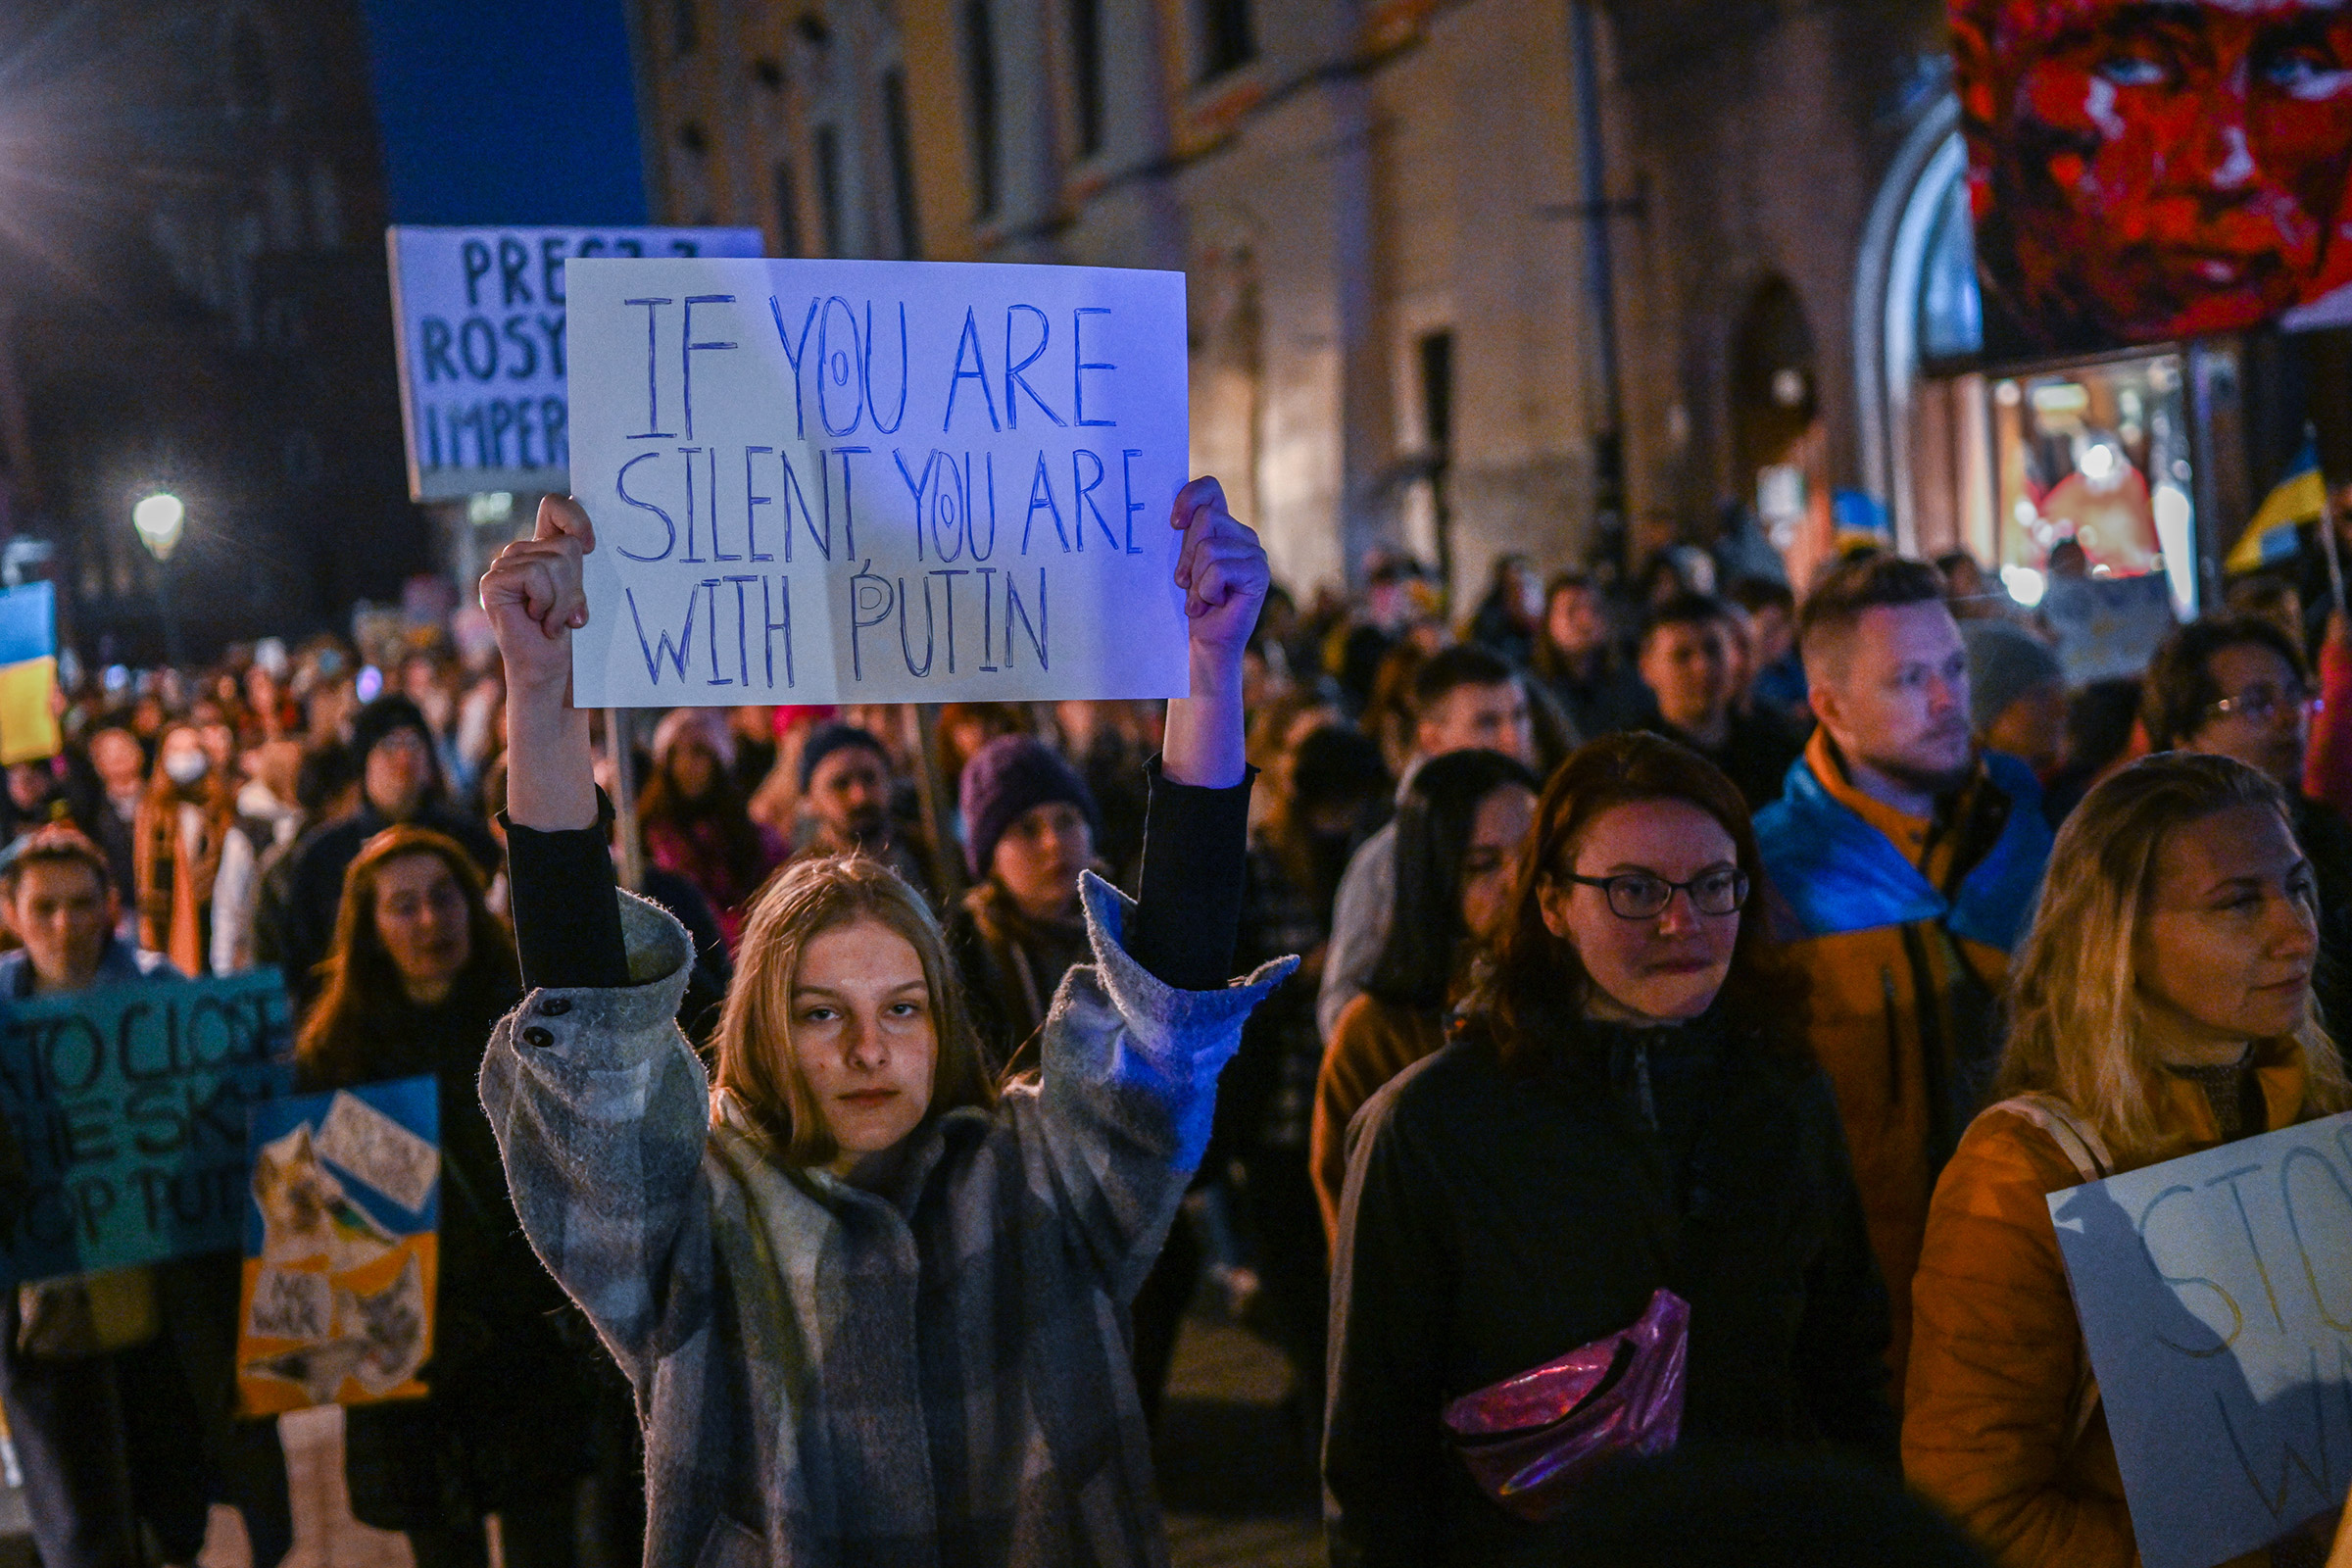 Protestors rally against the Russian invasion of Ukraine in Krakow, Poland, on March 24, 2022. (Omar Marques—Getty Images)